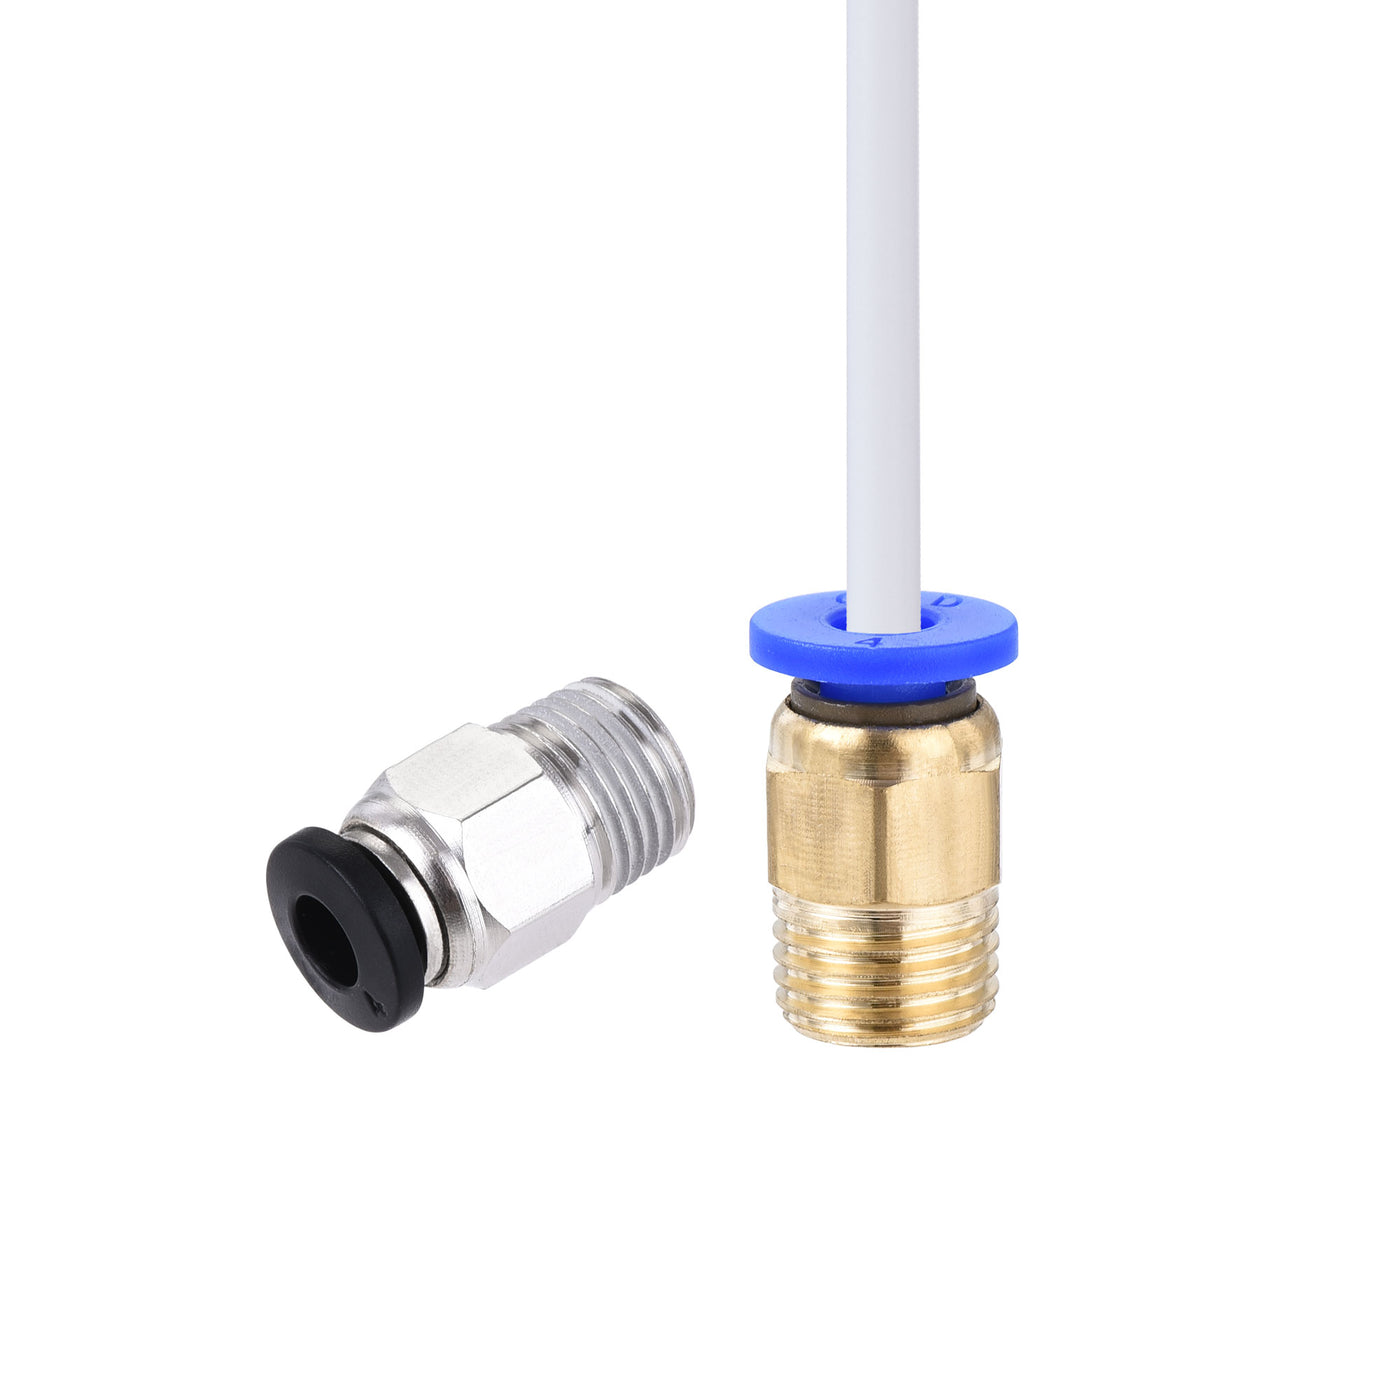 uxcell Uxcell Pneumatic PTFE Air Tubing Kit Hose Air Line Tubing 4mm OD 2M White with M10 G1/8 Push to Connect Fittings